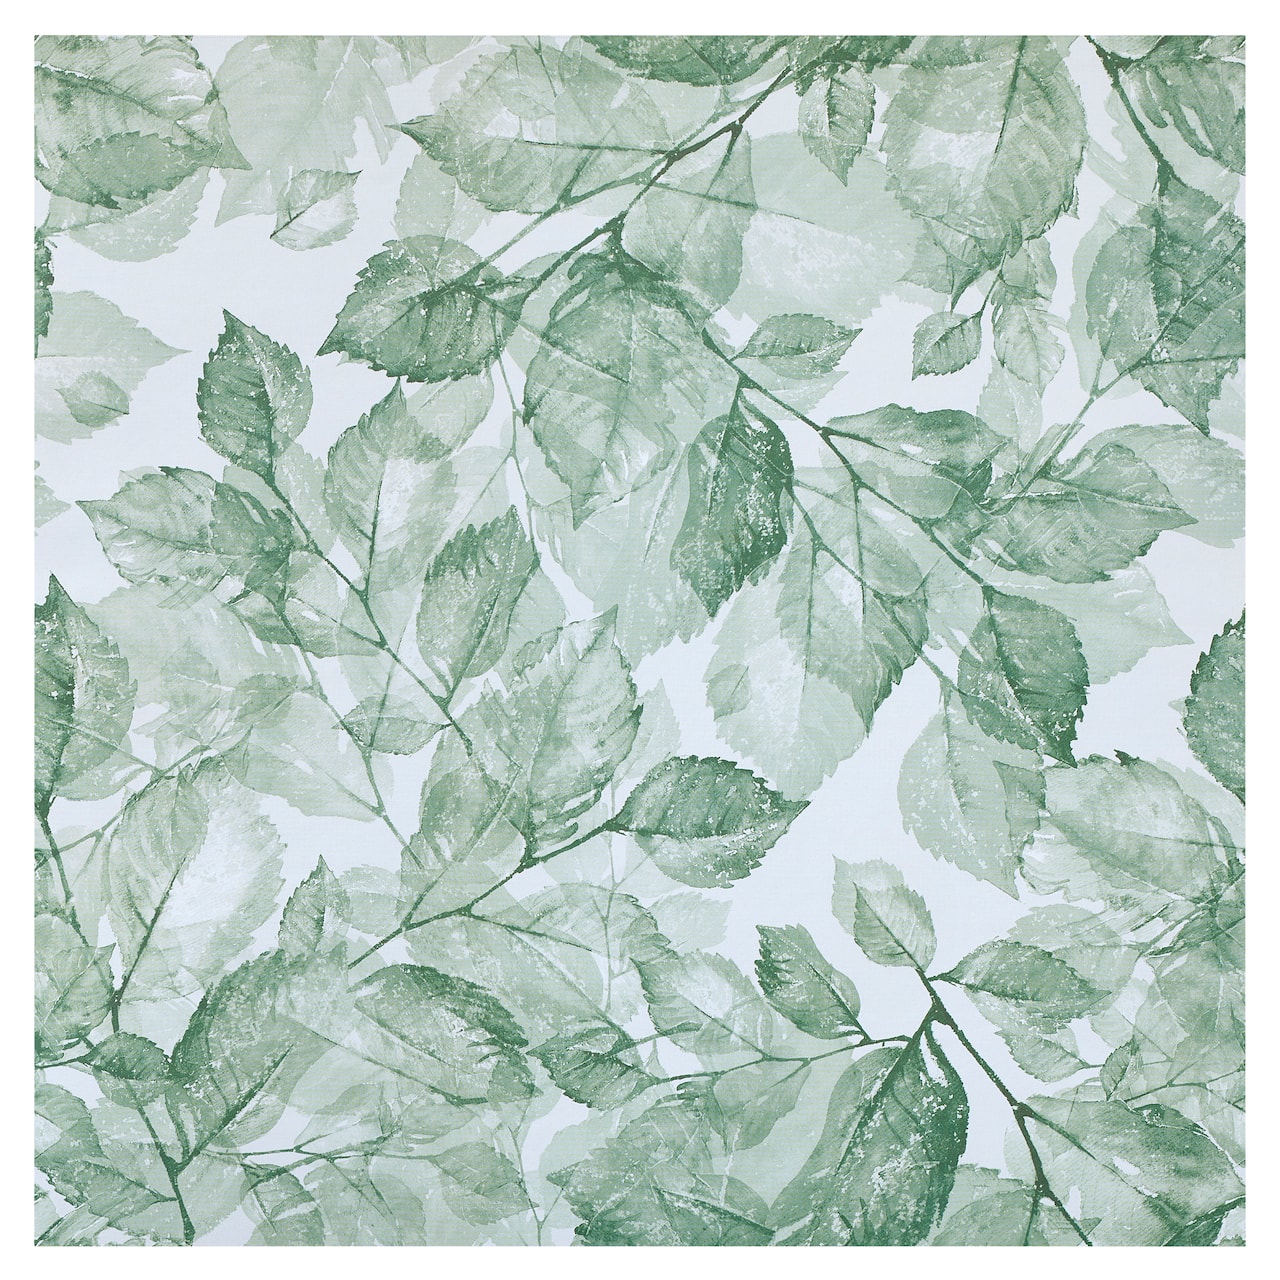 48 Pack: Green Leaves Cardstock Paper by Recollections, 12 inch x 12 inch, Size: 12” x 12”